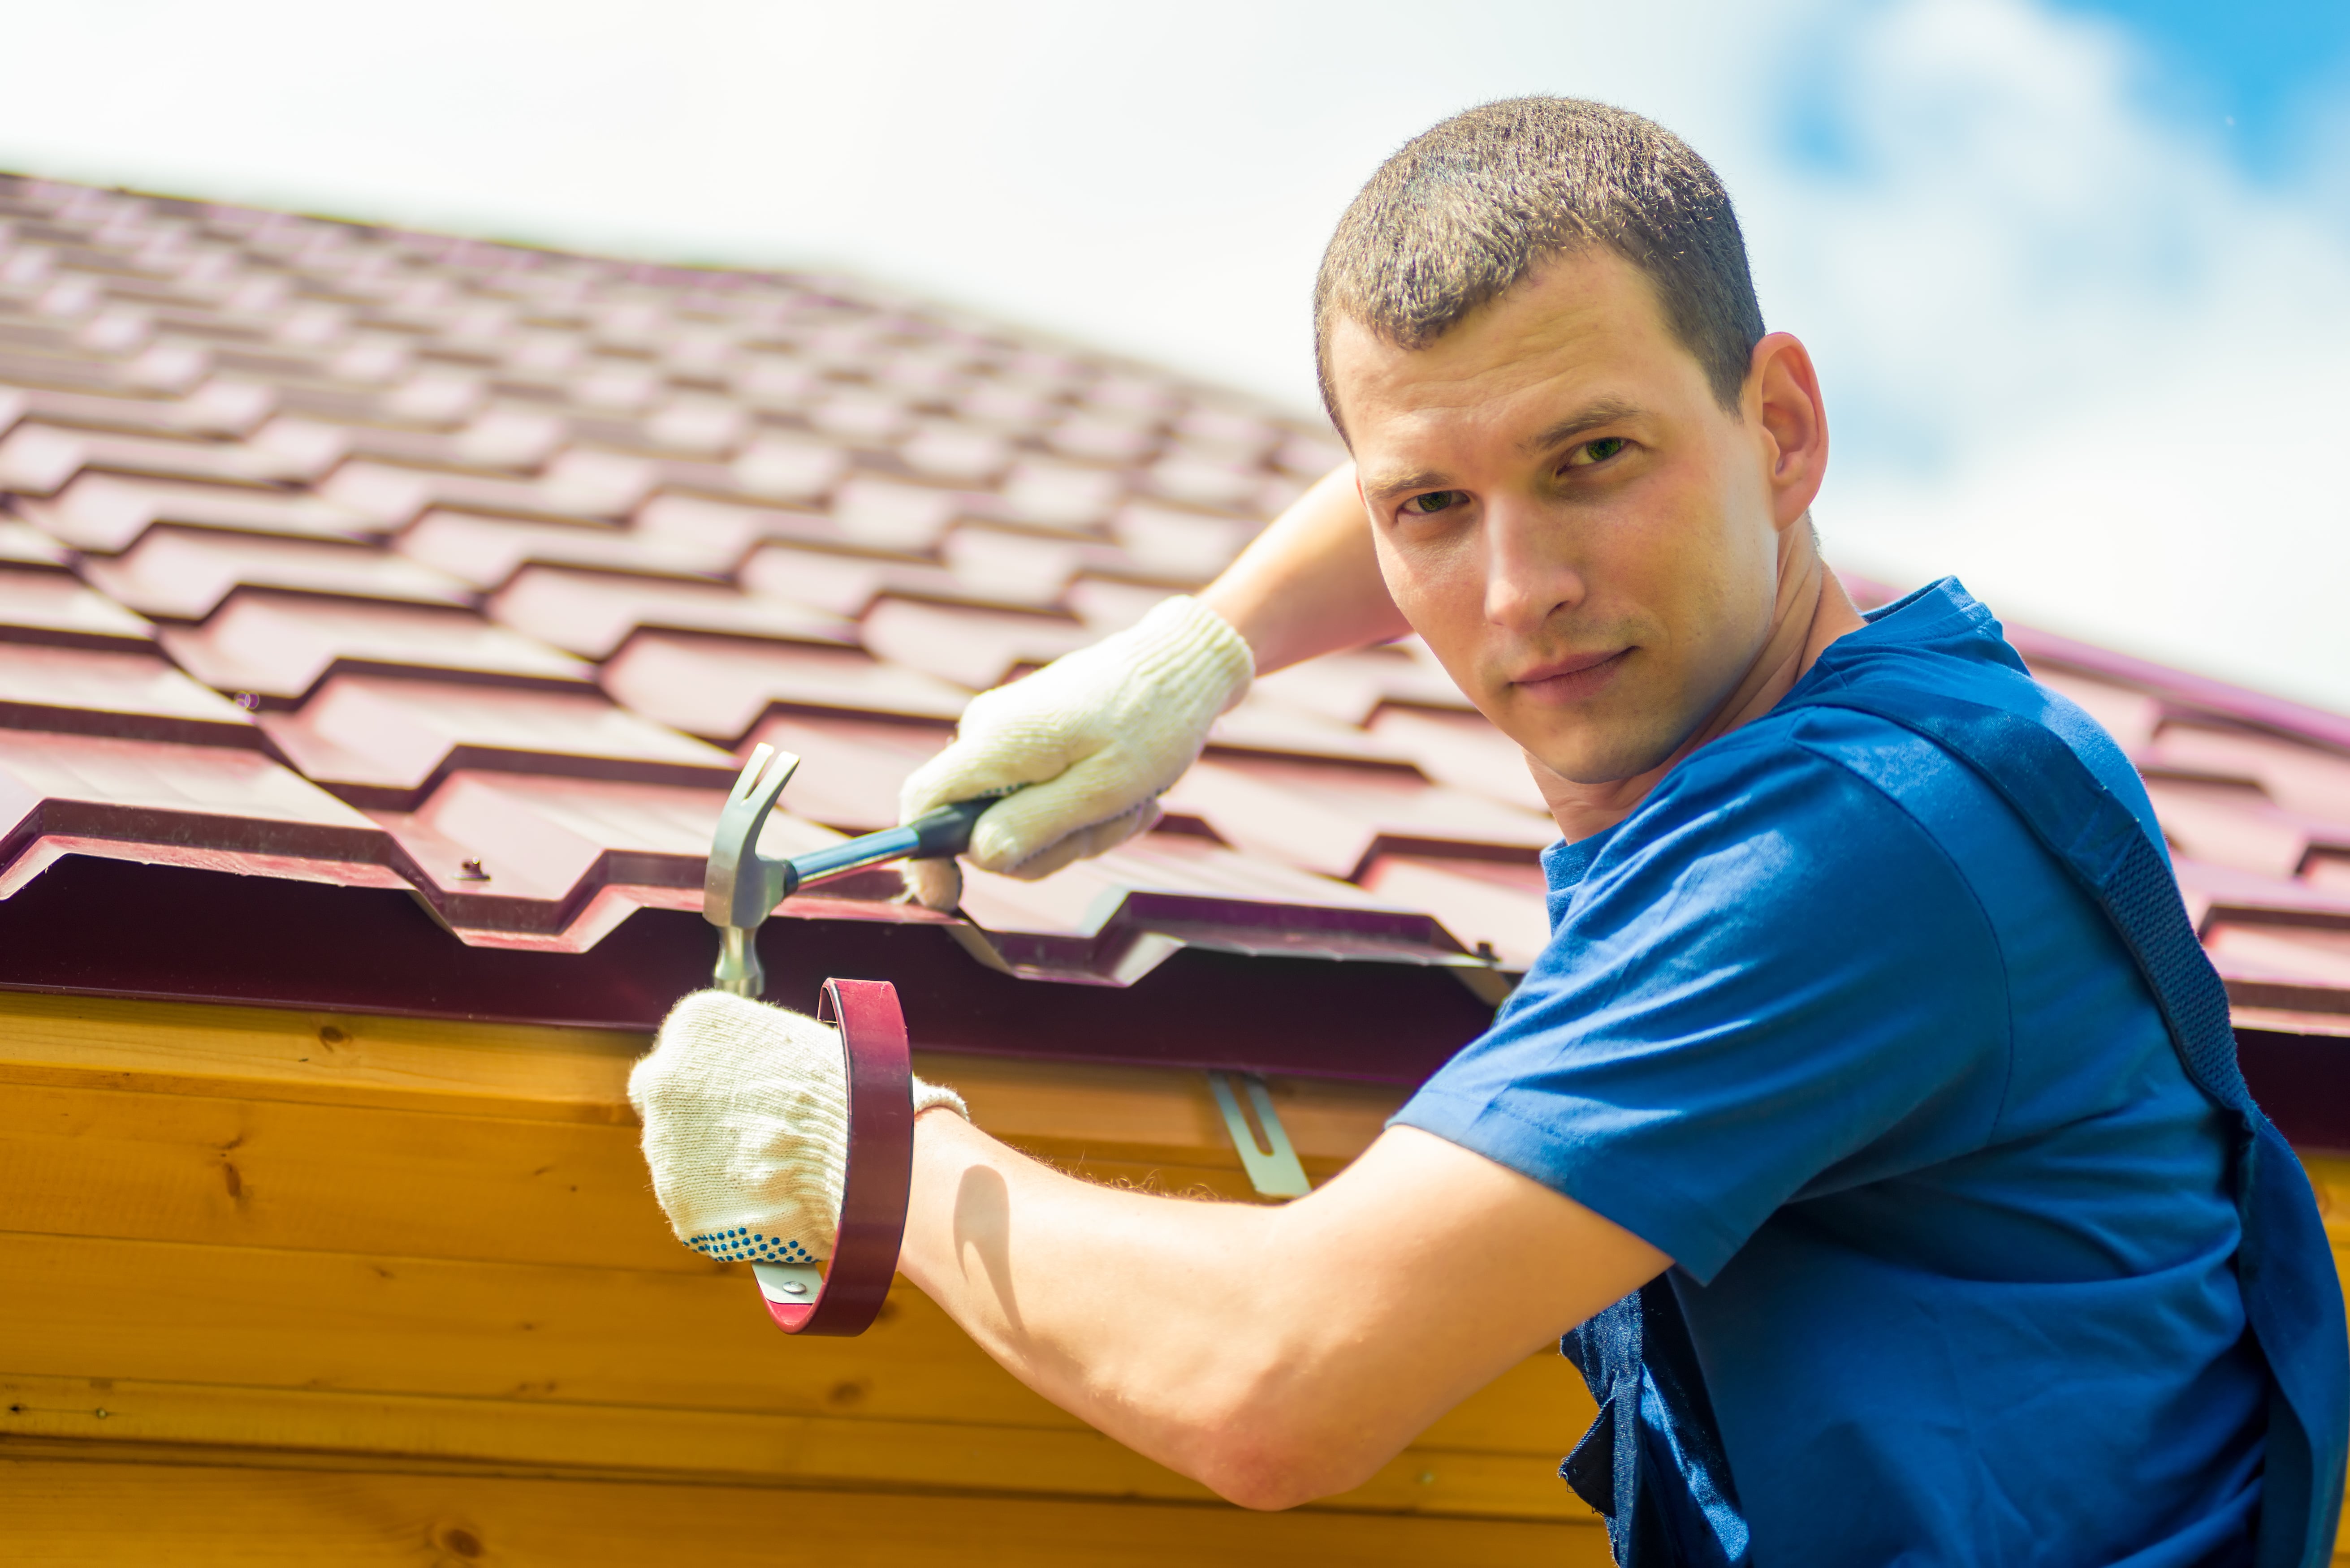 expert and professional roofers repairing a roof